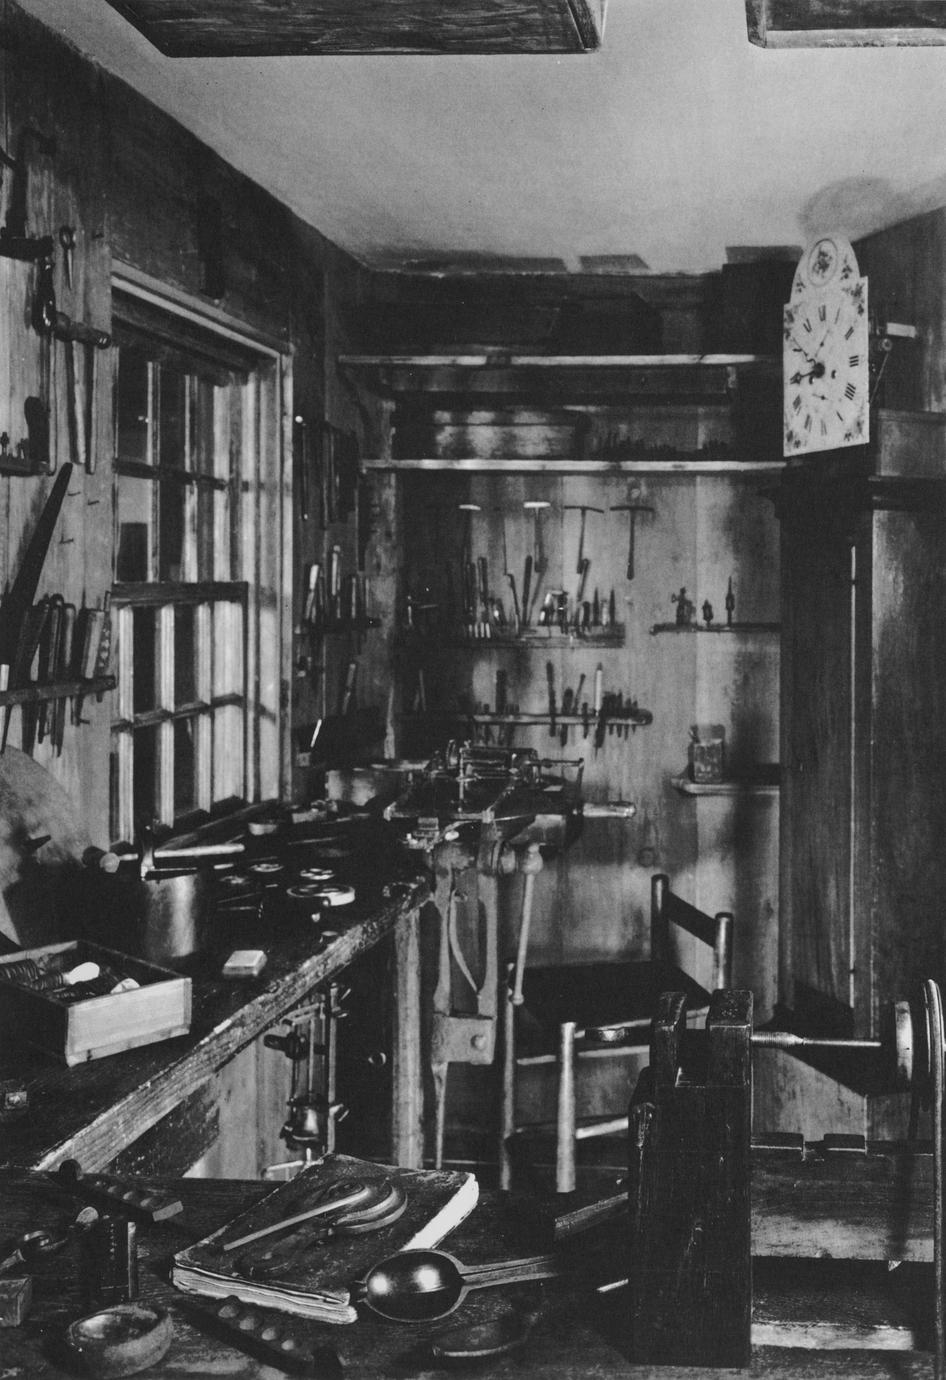 Black and white photograph of the interior of the reconstructed Dominy clock shop